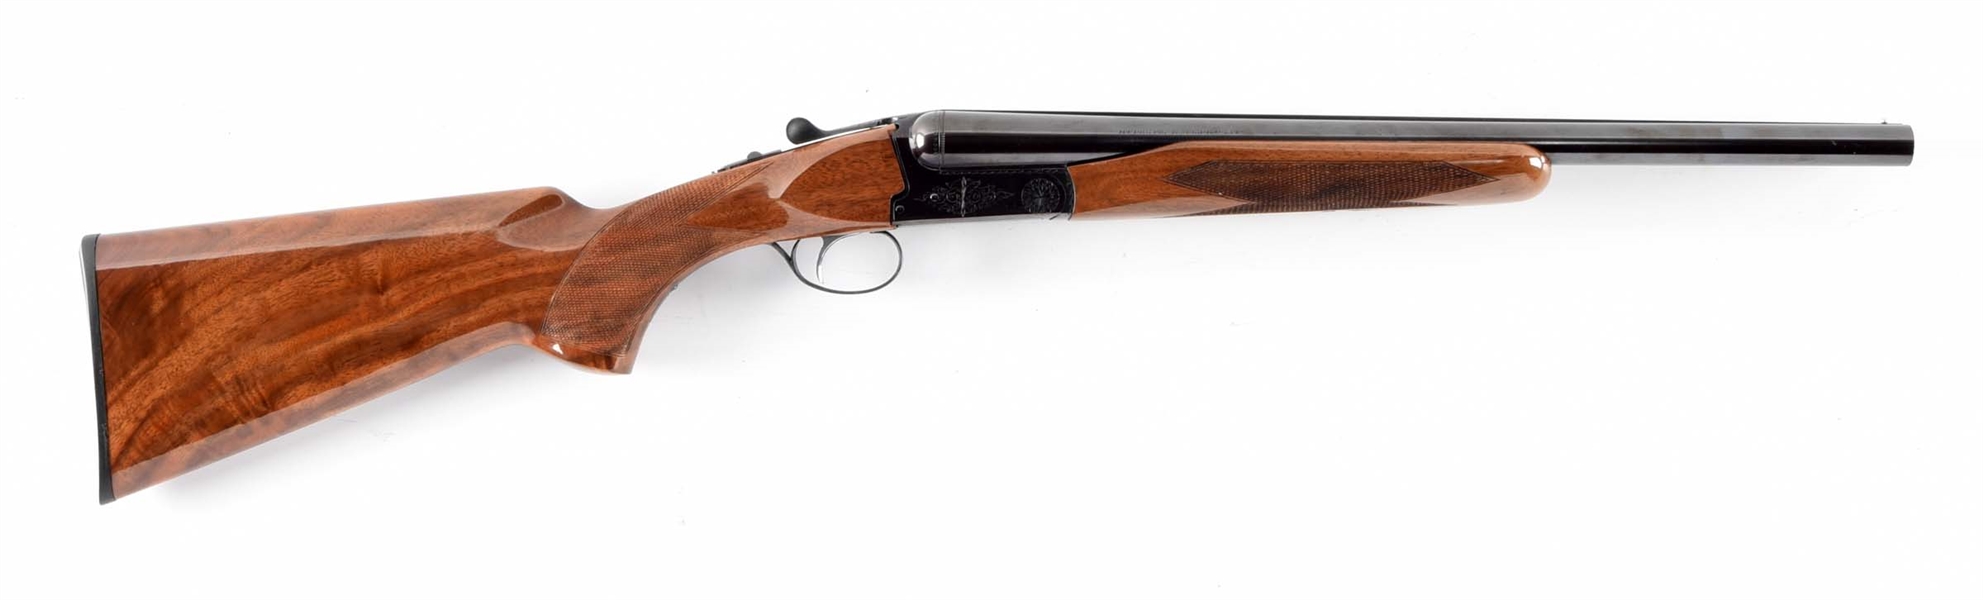 (M) BROWNING BSS SIDE BY SIDE COACH SHOTGUN.